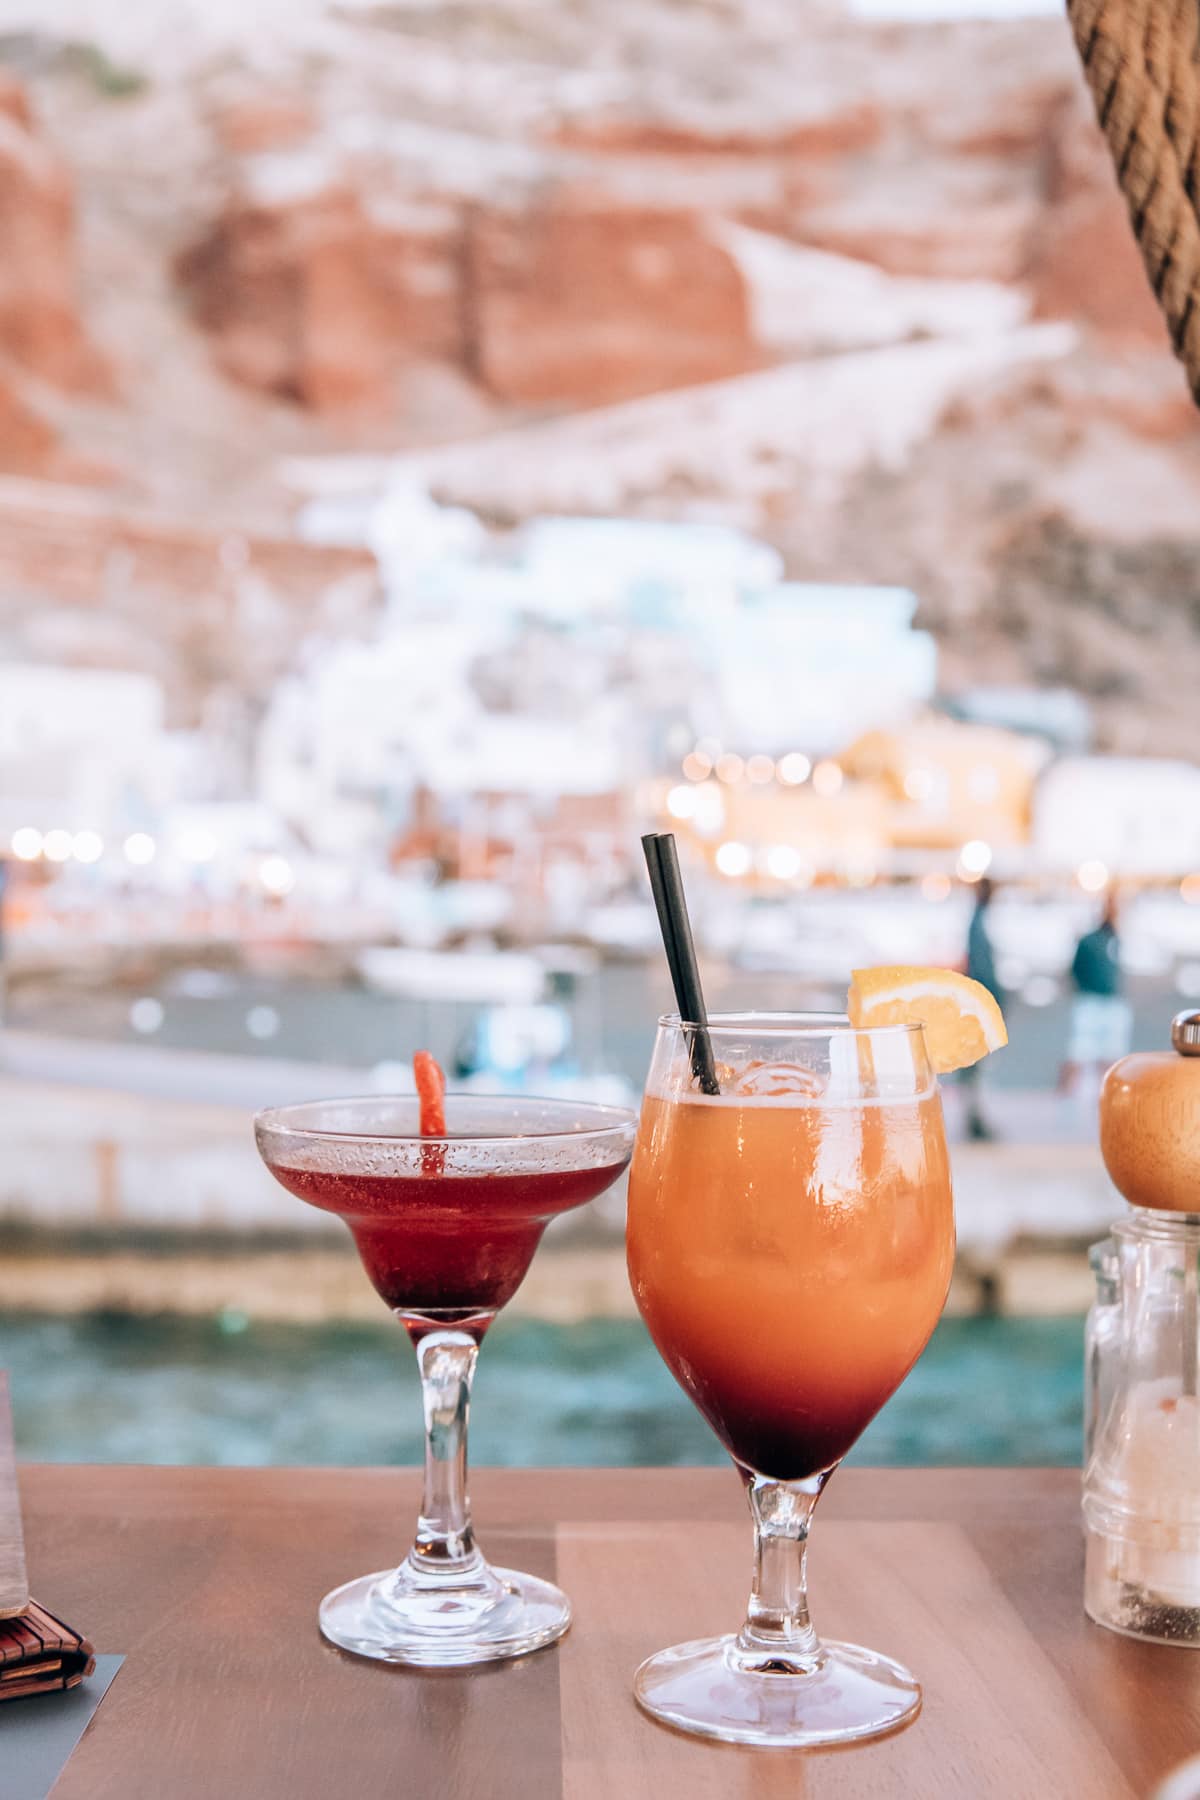 The perfect Santorini itinerary, by travel bloggers Babes That Wander